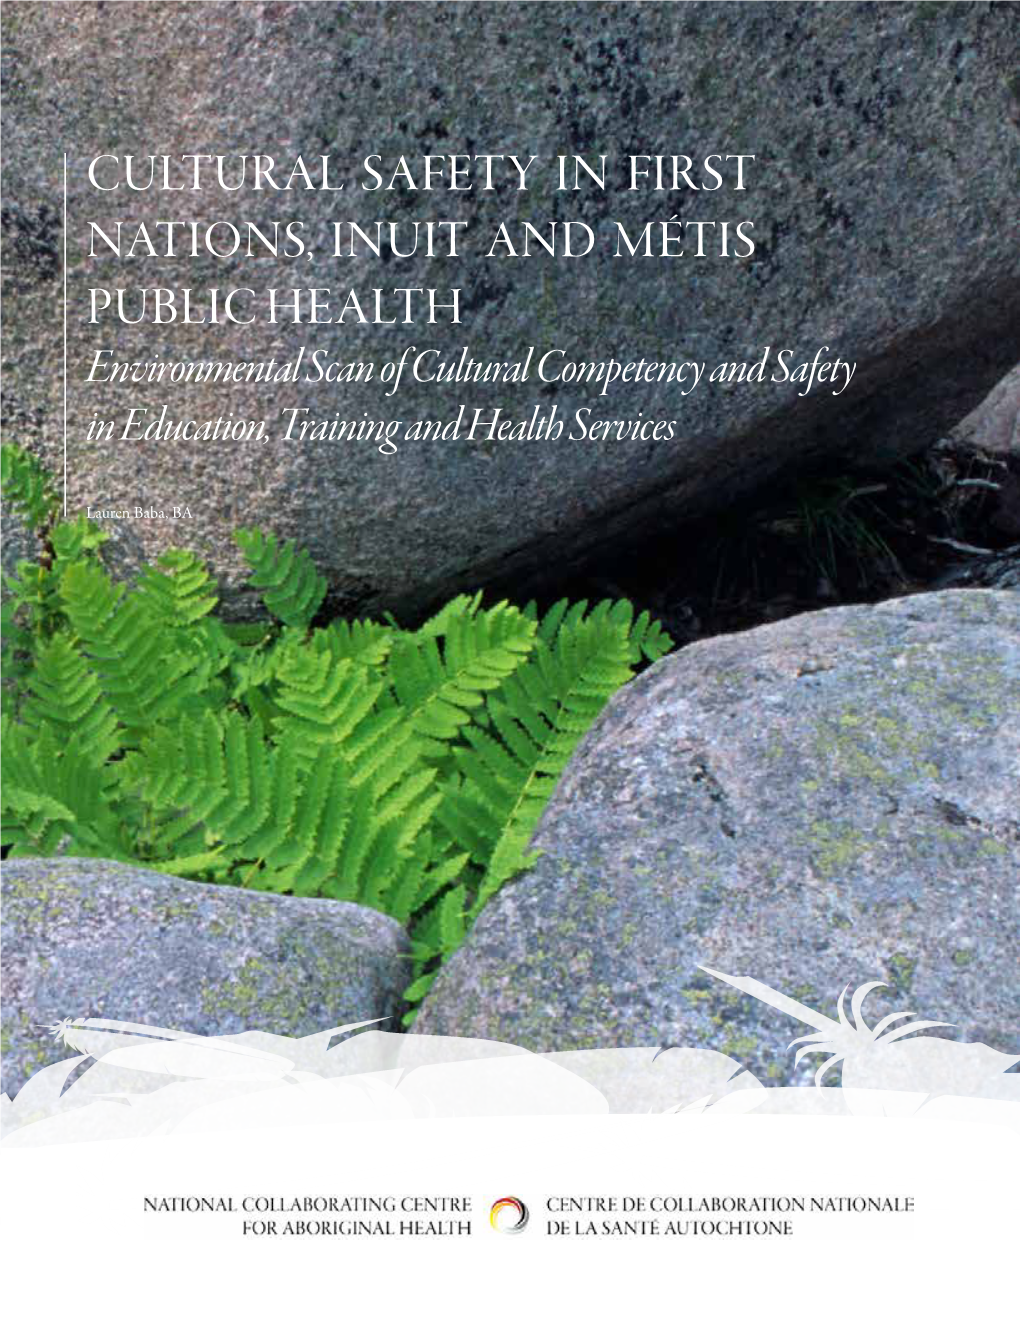 Cultural Safety in First Nations, Inuit and Métis Public Health Environmental Scan of Cultural Competency and Safety in Education, Training and Health Services